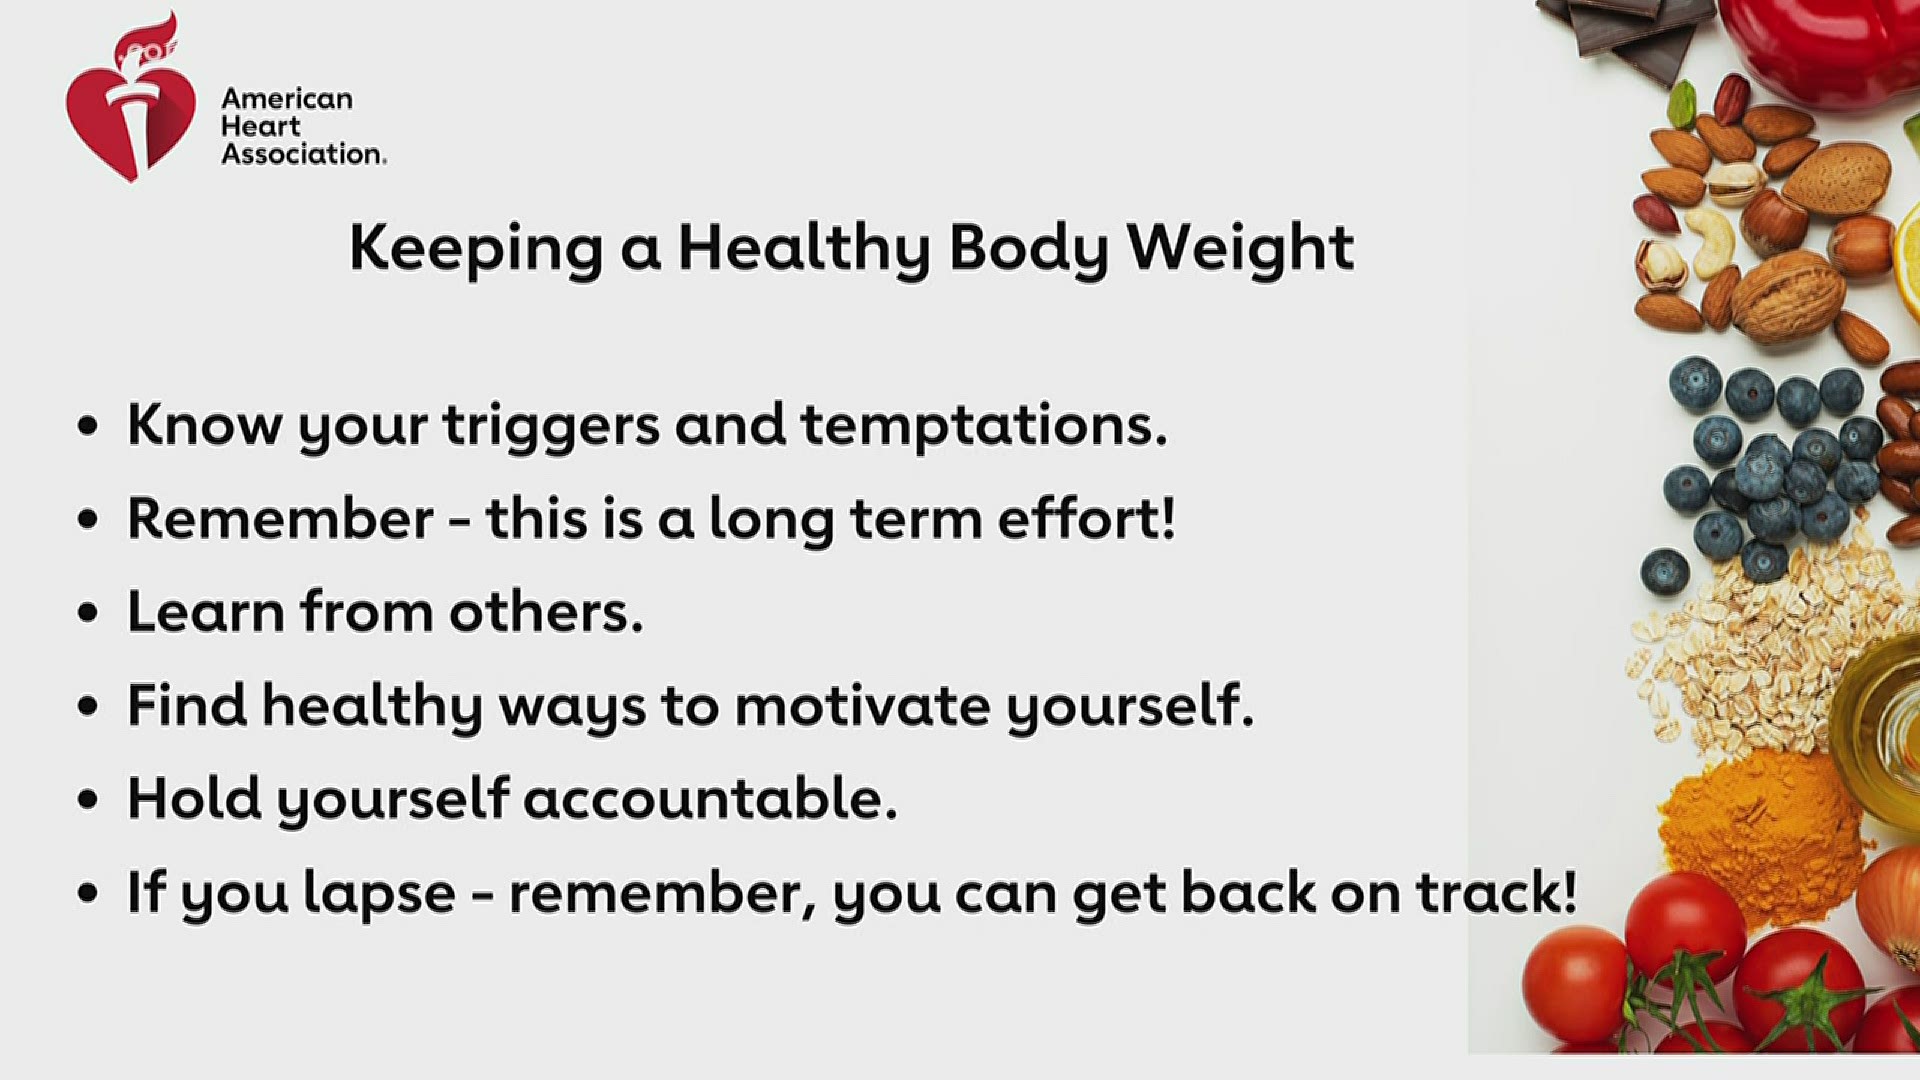 Maintaining a healthy weight can give you such a great quality of life. But its not always easy. Arkansas Heart Association gives us a few tips.